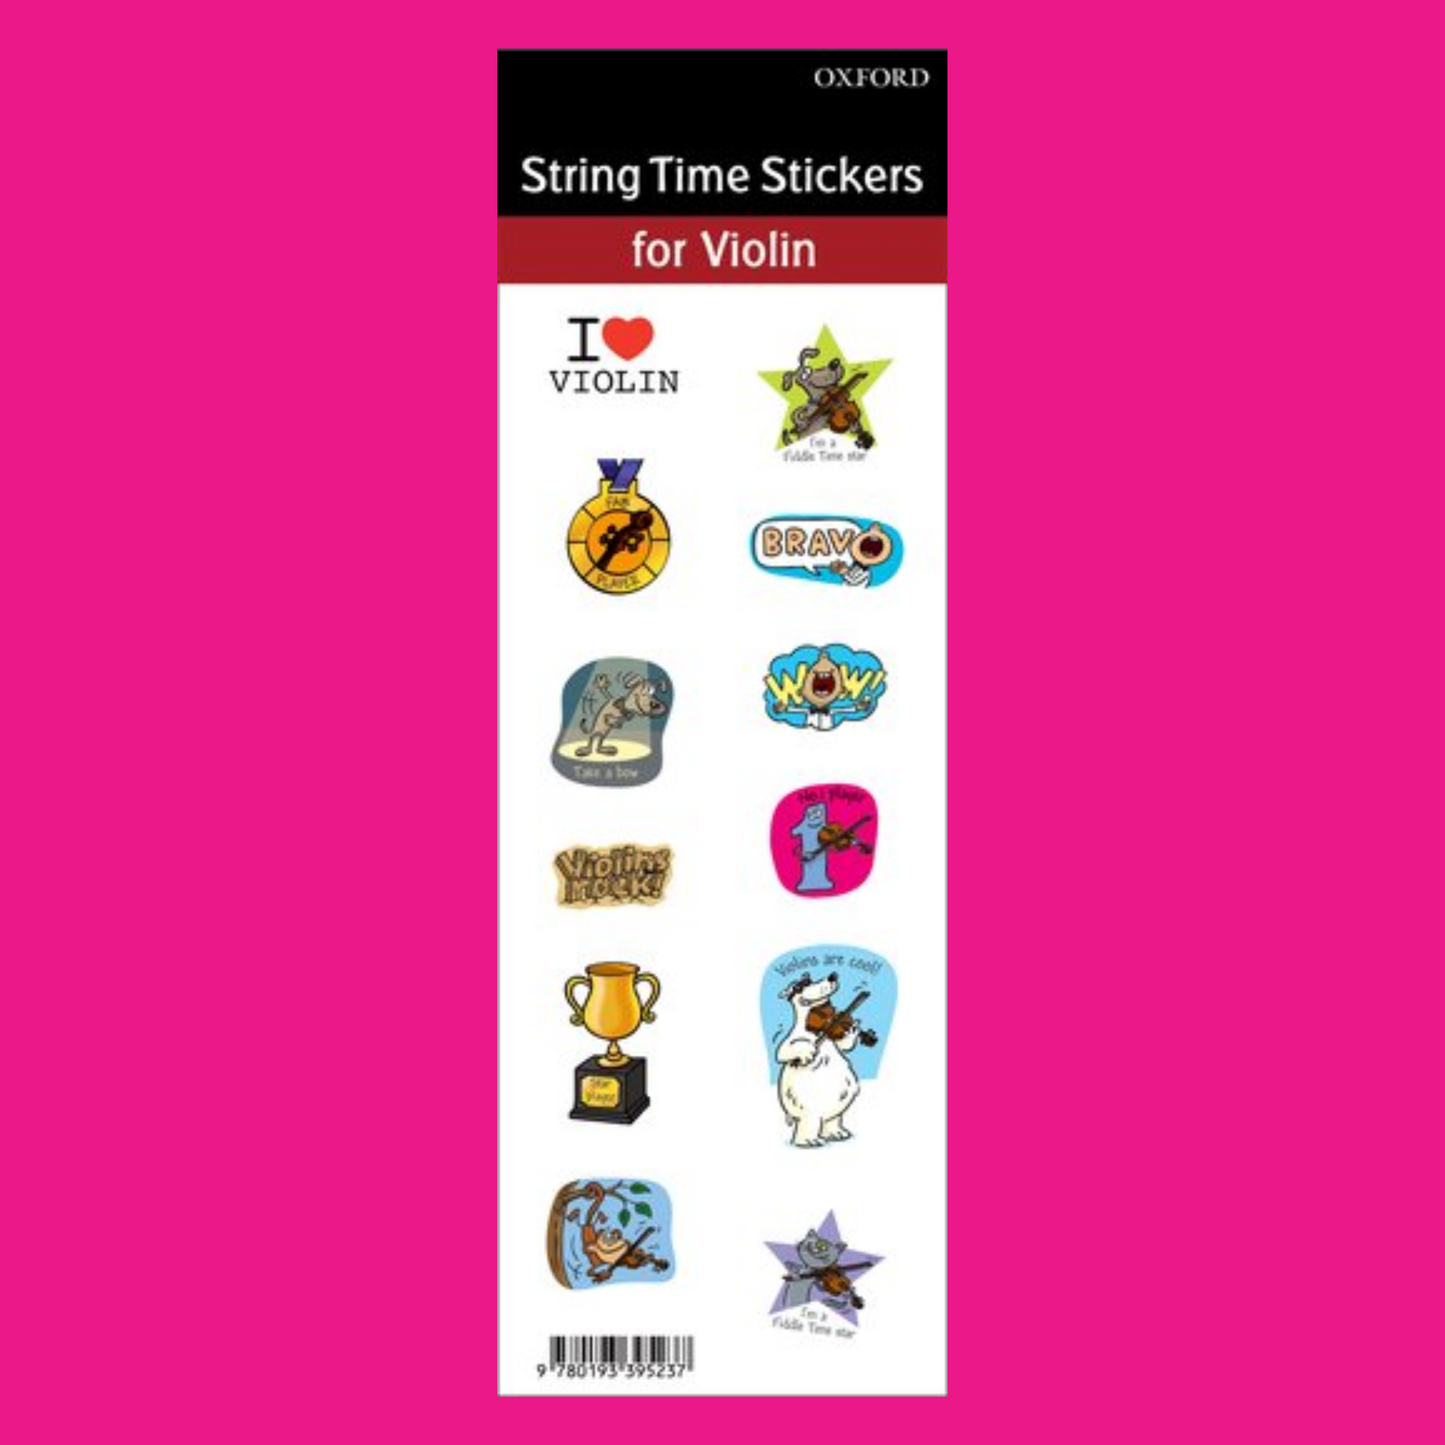 Fiddle Time Student Pack - Starter Pack for Violin Players (Book and Resources)